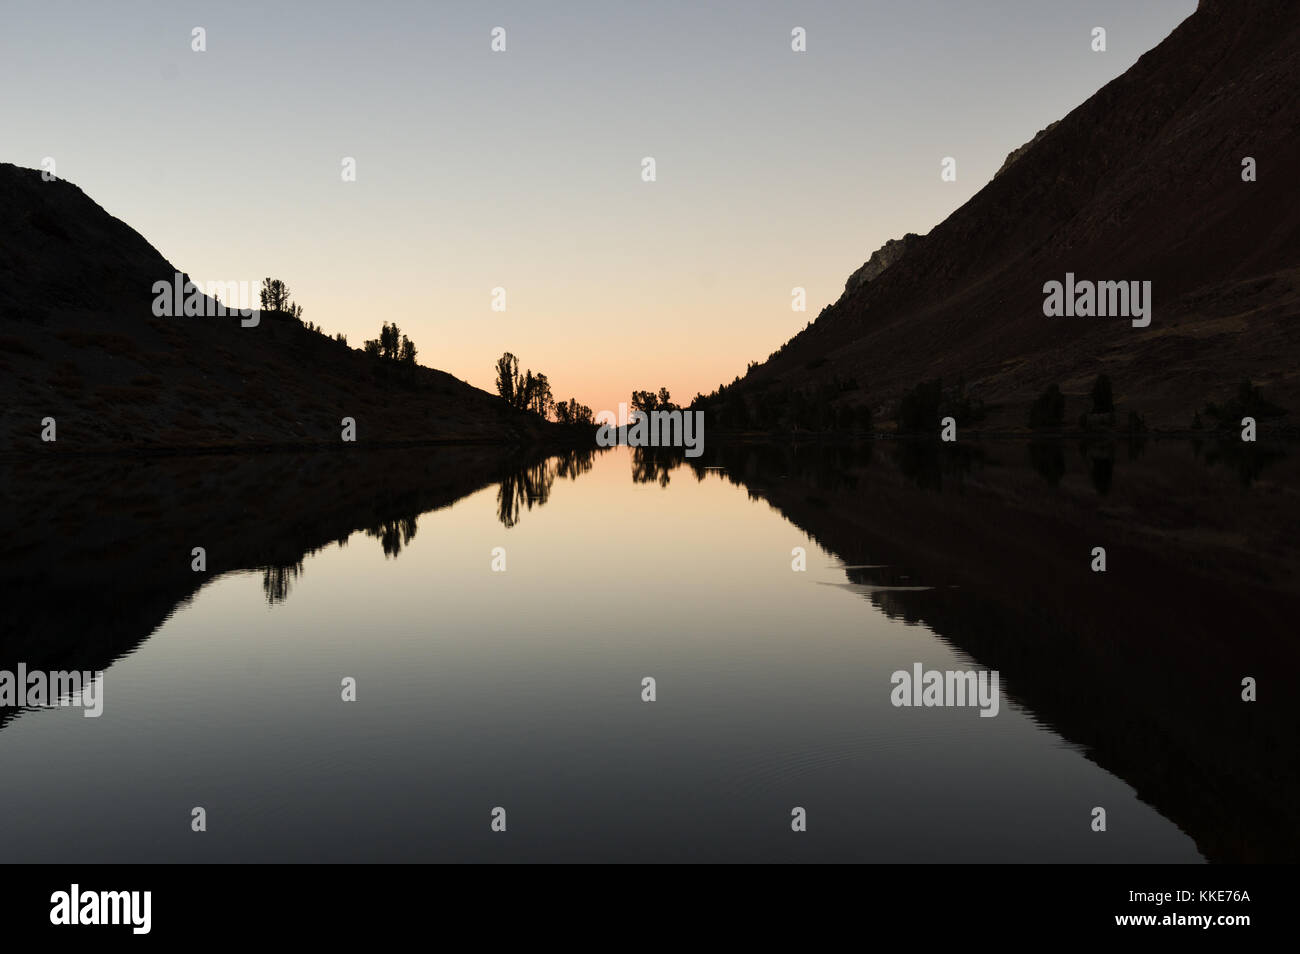 reflection of hills and trees in a mountain lake after sunset Stock Photo